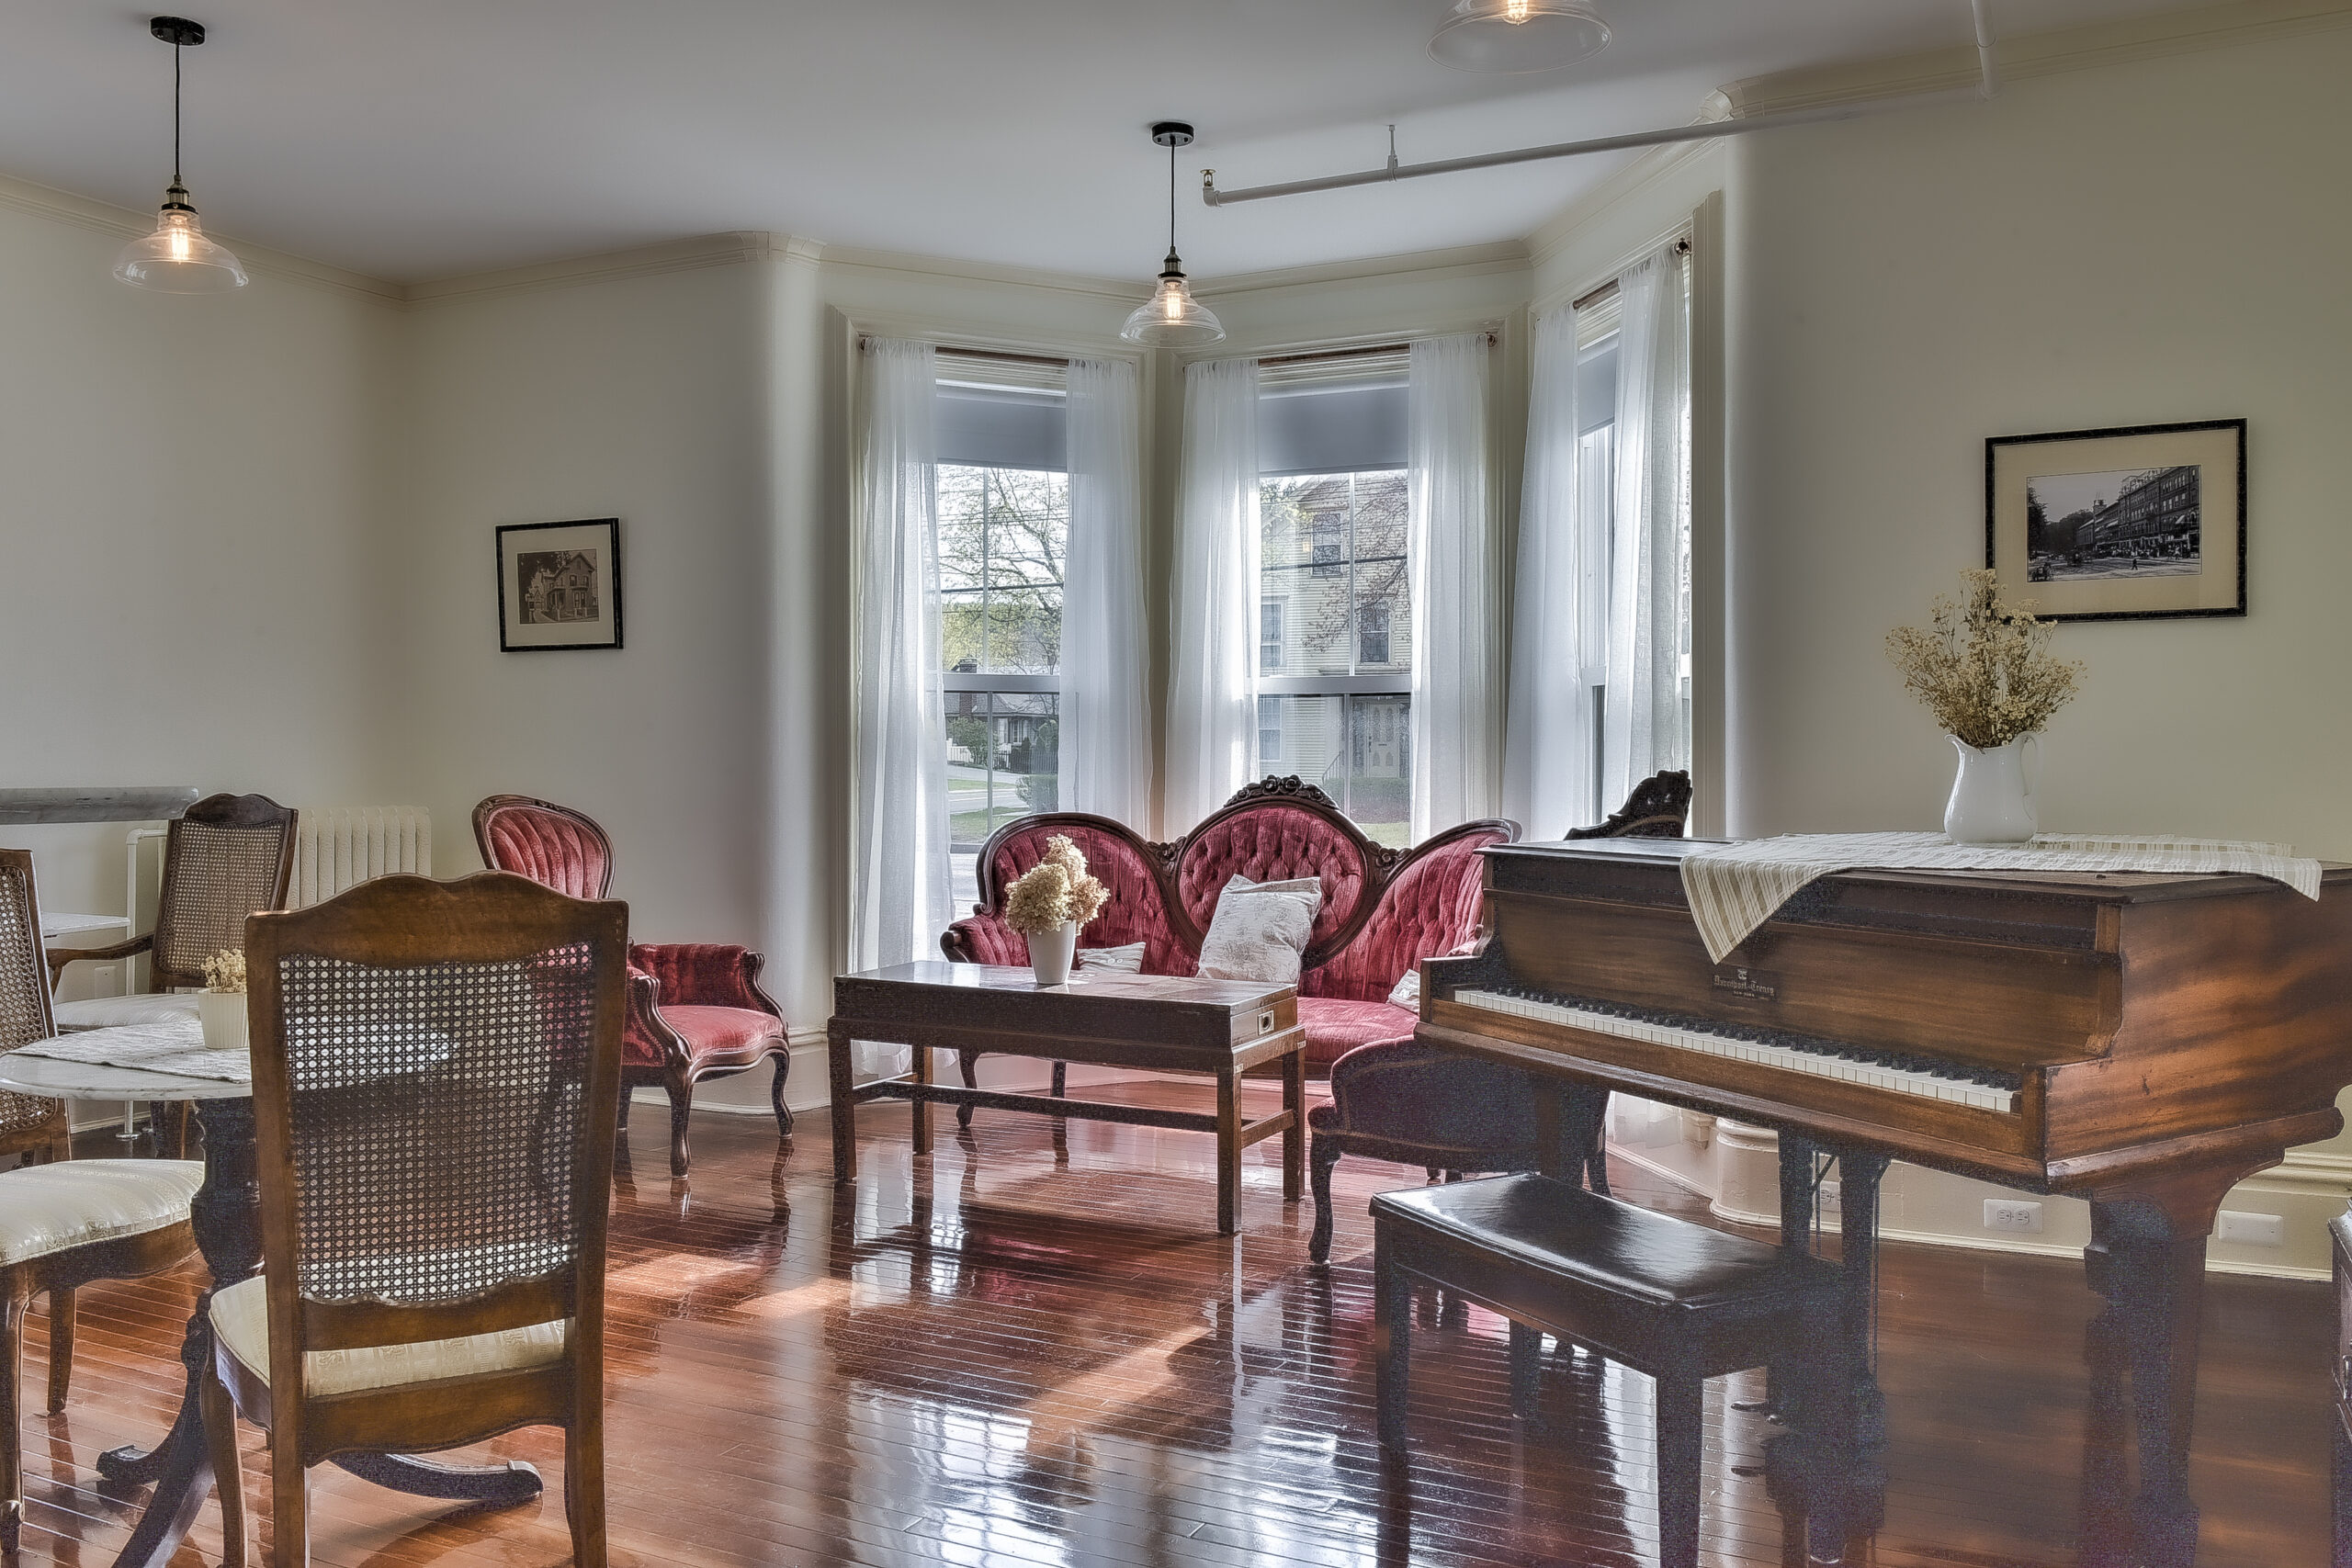 See the front parlor that guests of The Slate Room have access to at The Burrell House